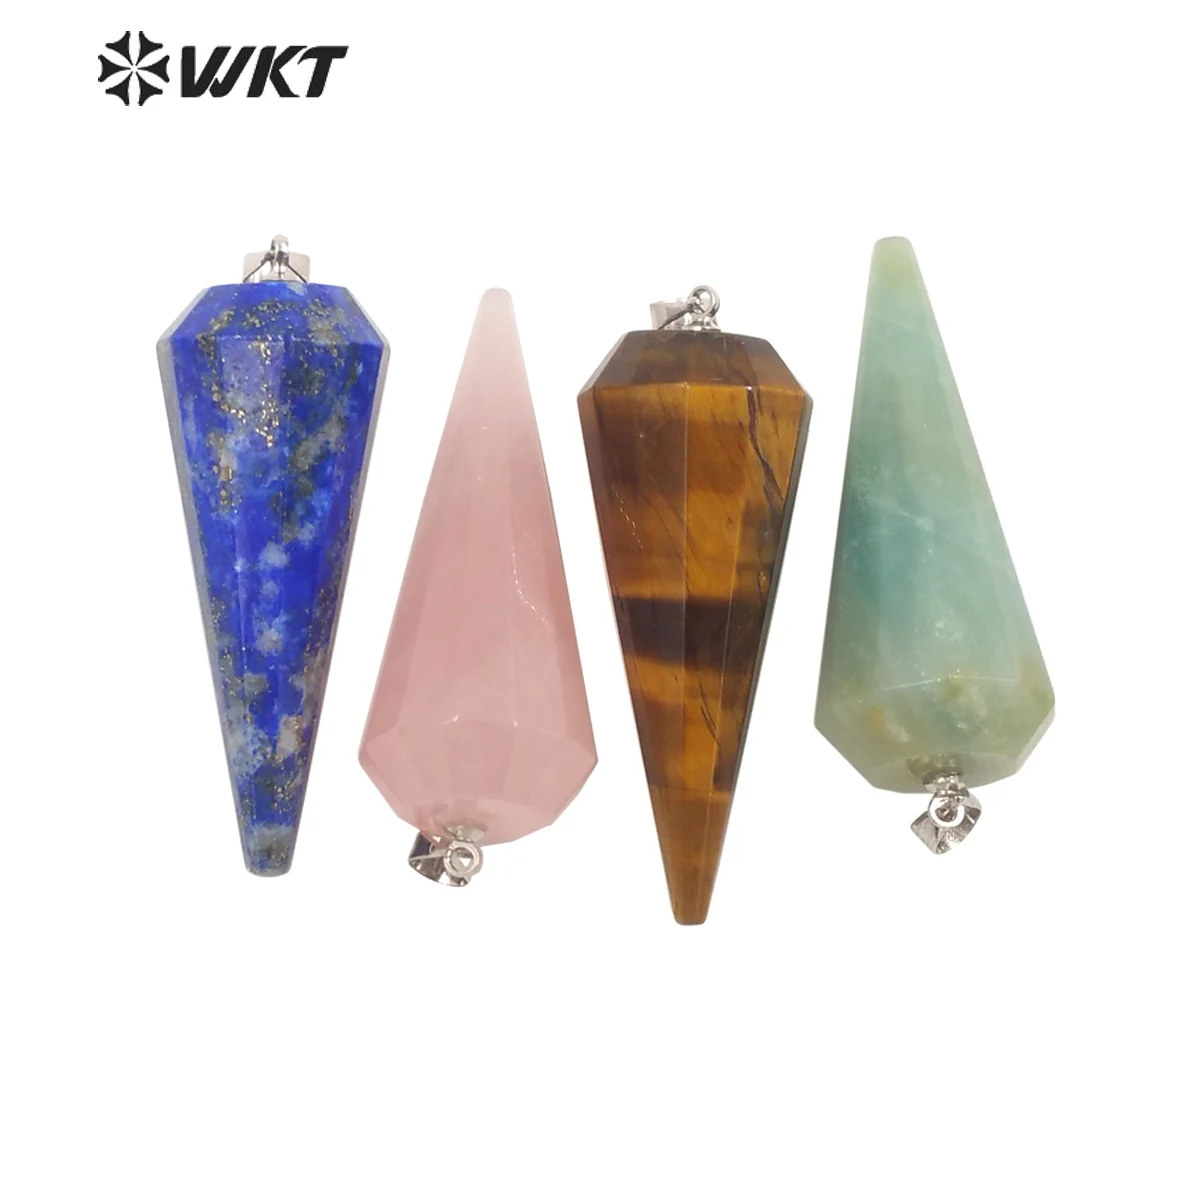 

WT-P1804 WKT 2022 Noble Stone New Style Cone Shape Natural Gemstones Women Gift Pendant For Party Trend Jewelry Fashion